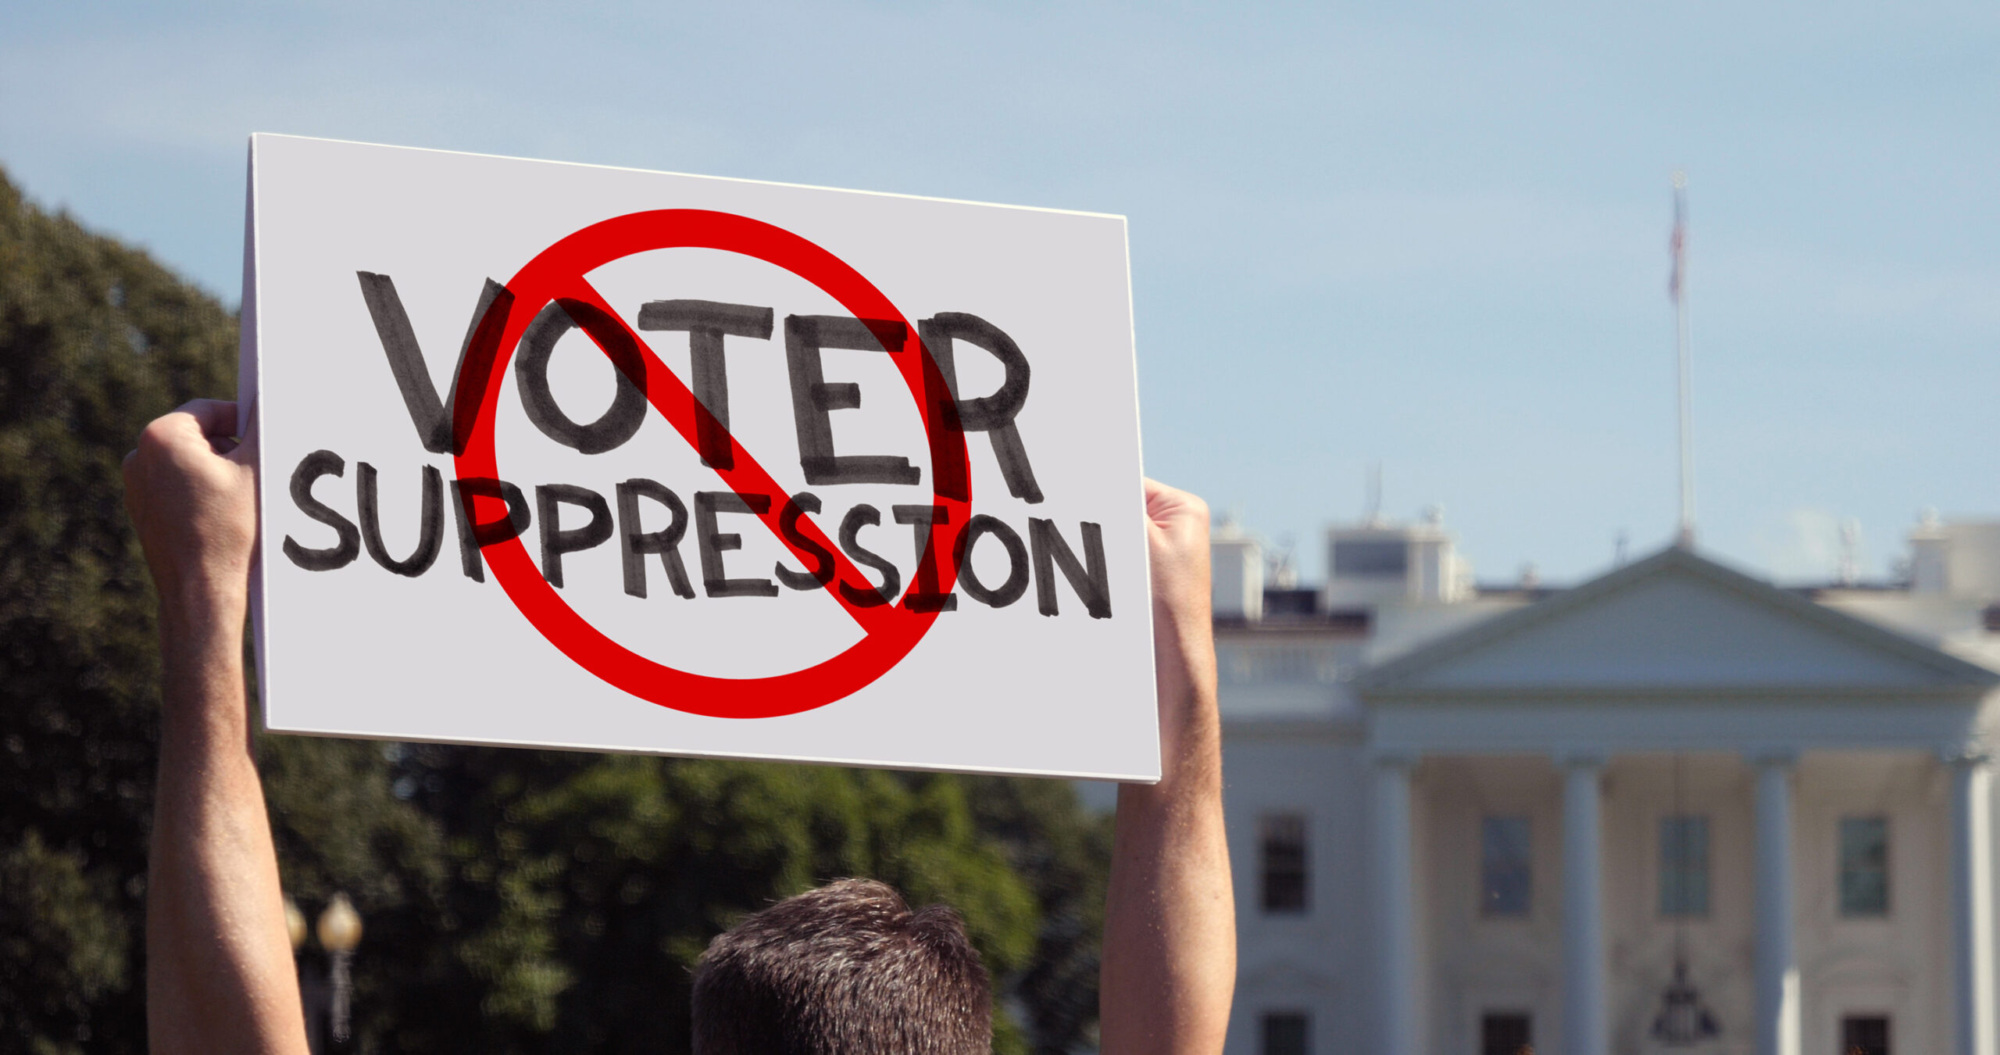 A man waves a handmade STOP VOTER SUPPRESSION protest sign outside the White House.